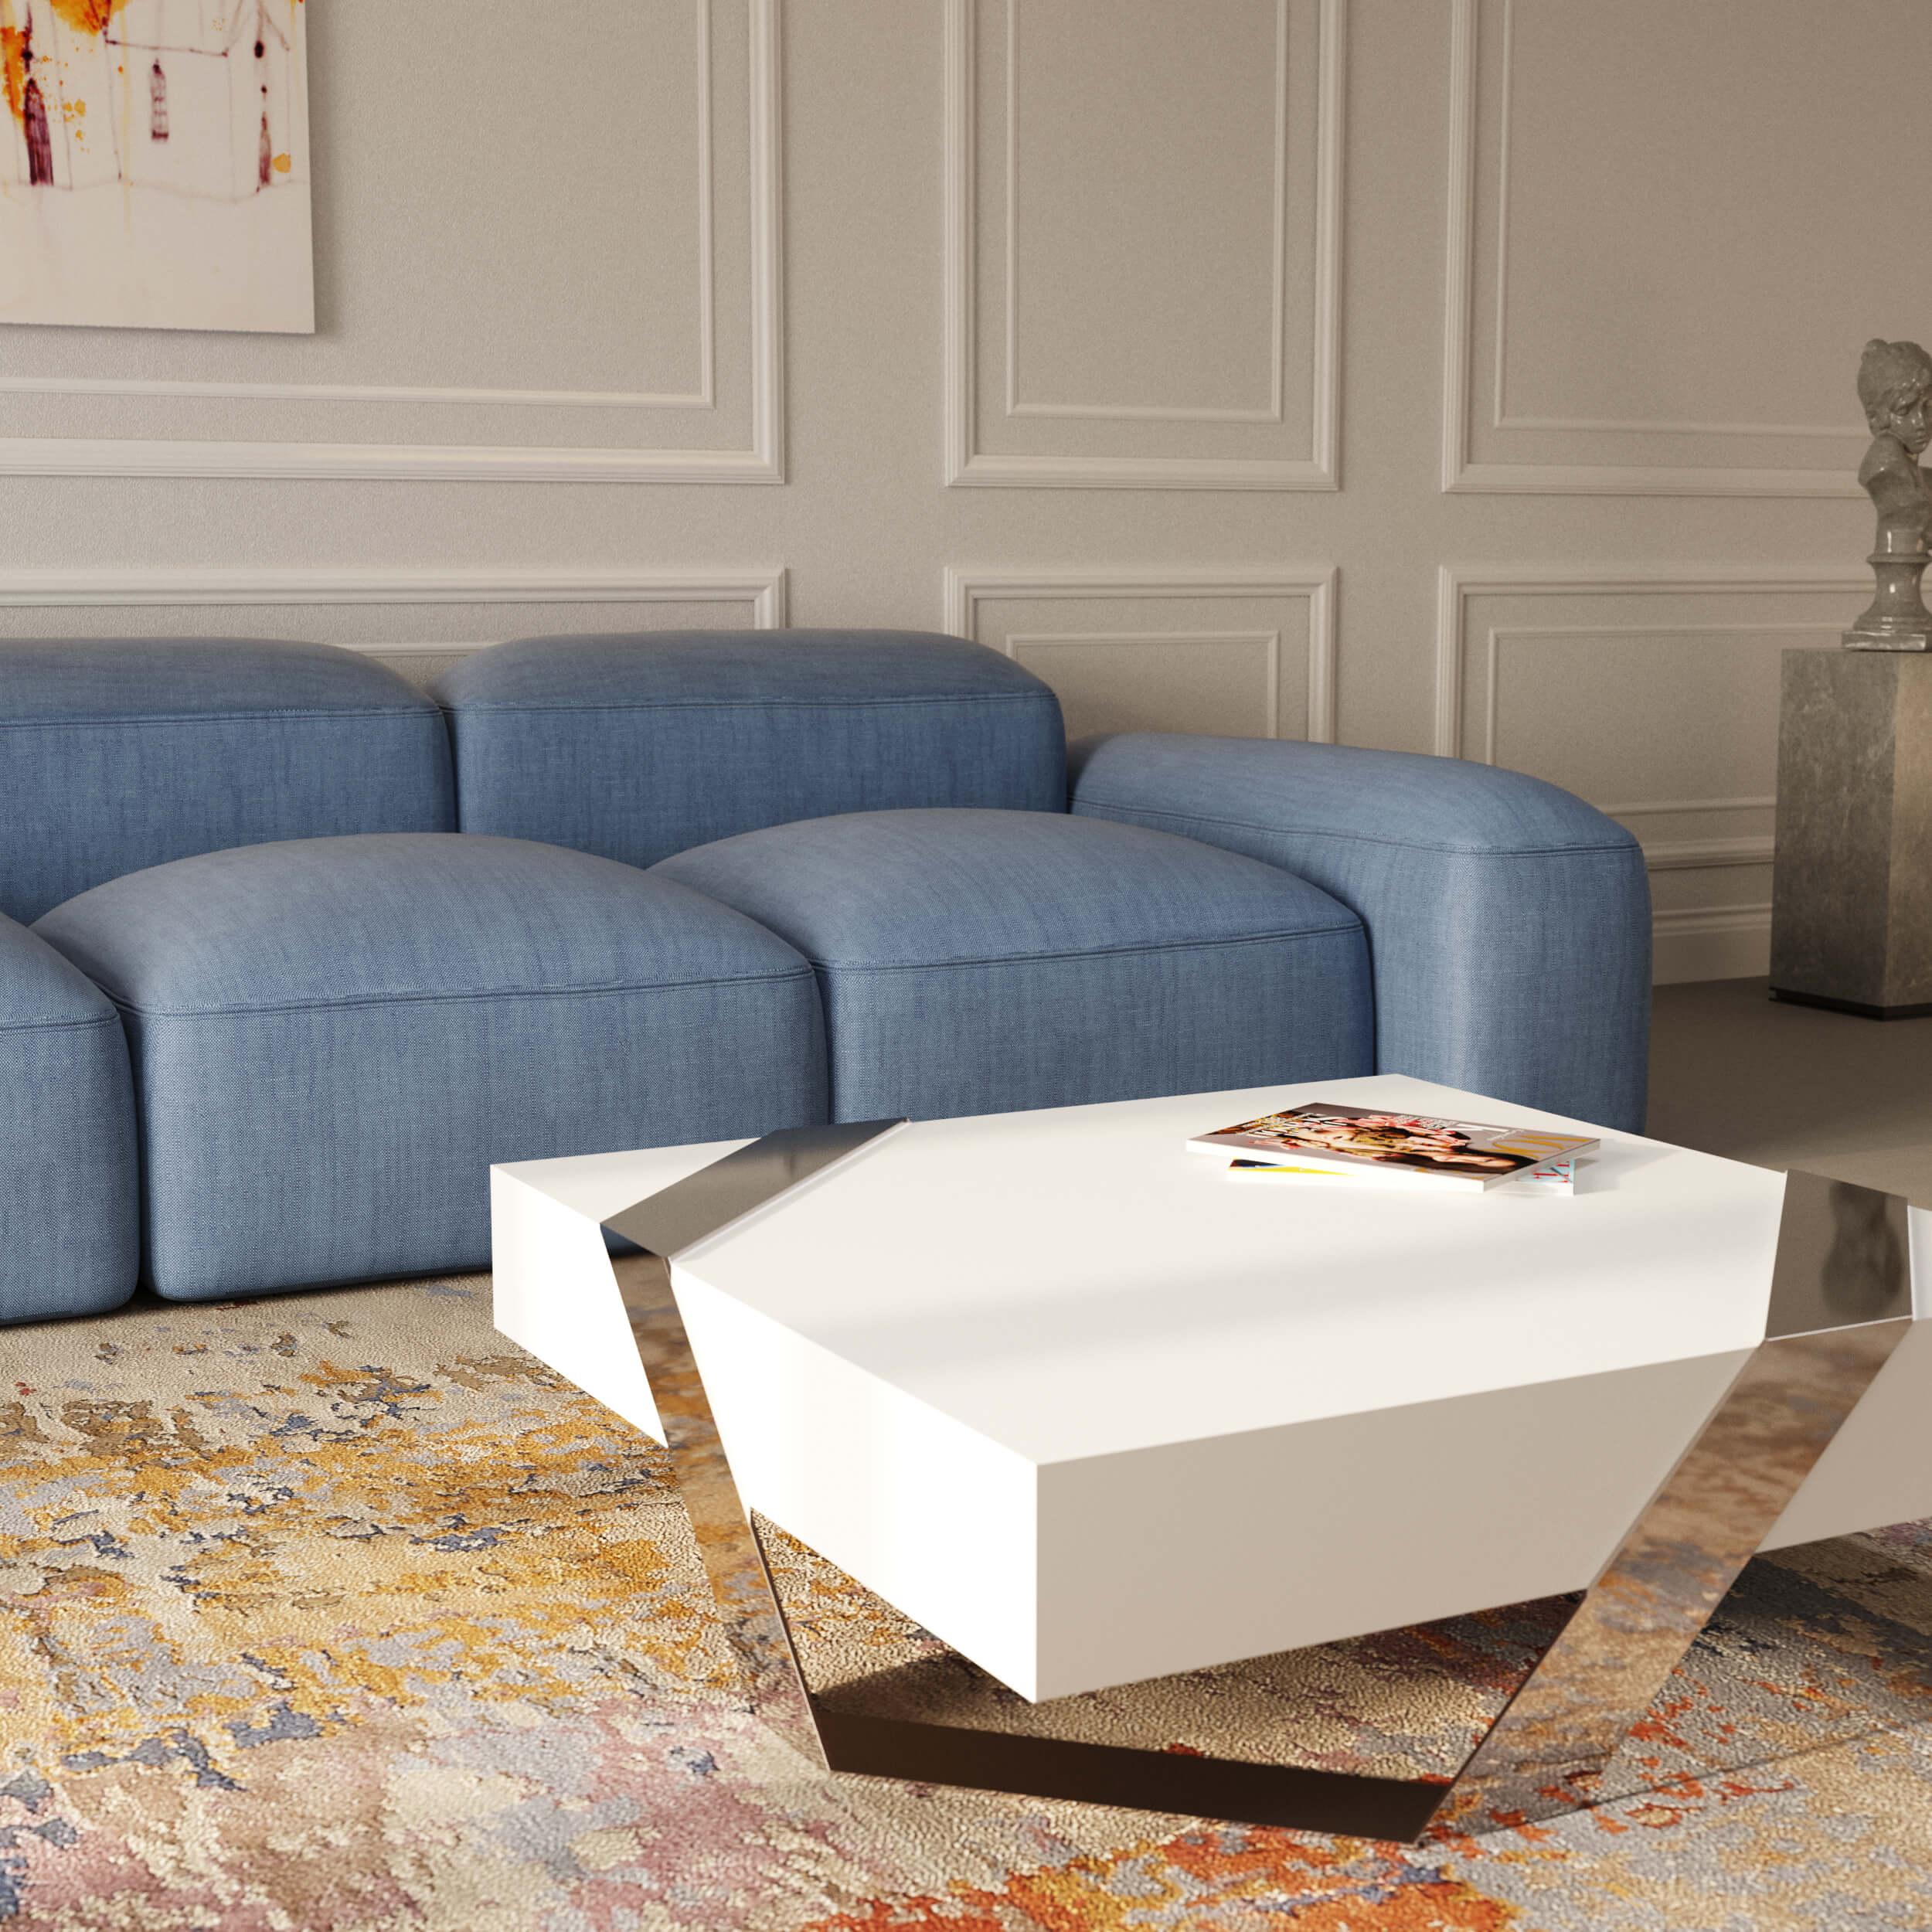 Contemporary Modern Minimalist Square Coffee Table White Lacquer Brushed Stainless Steel For Sale